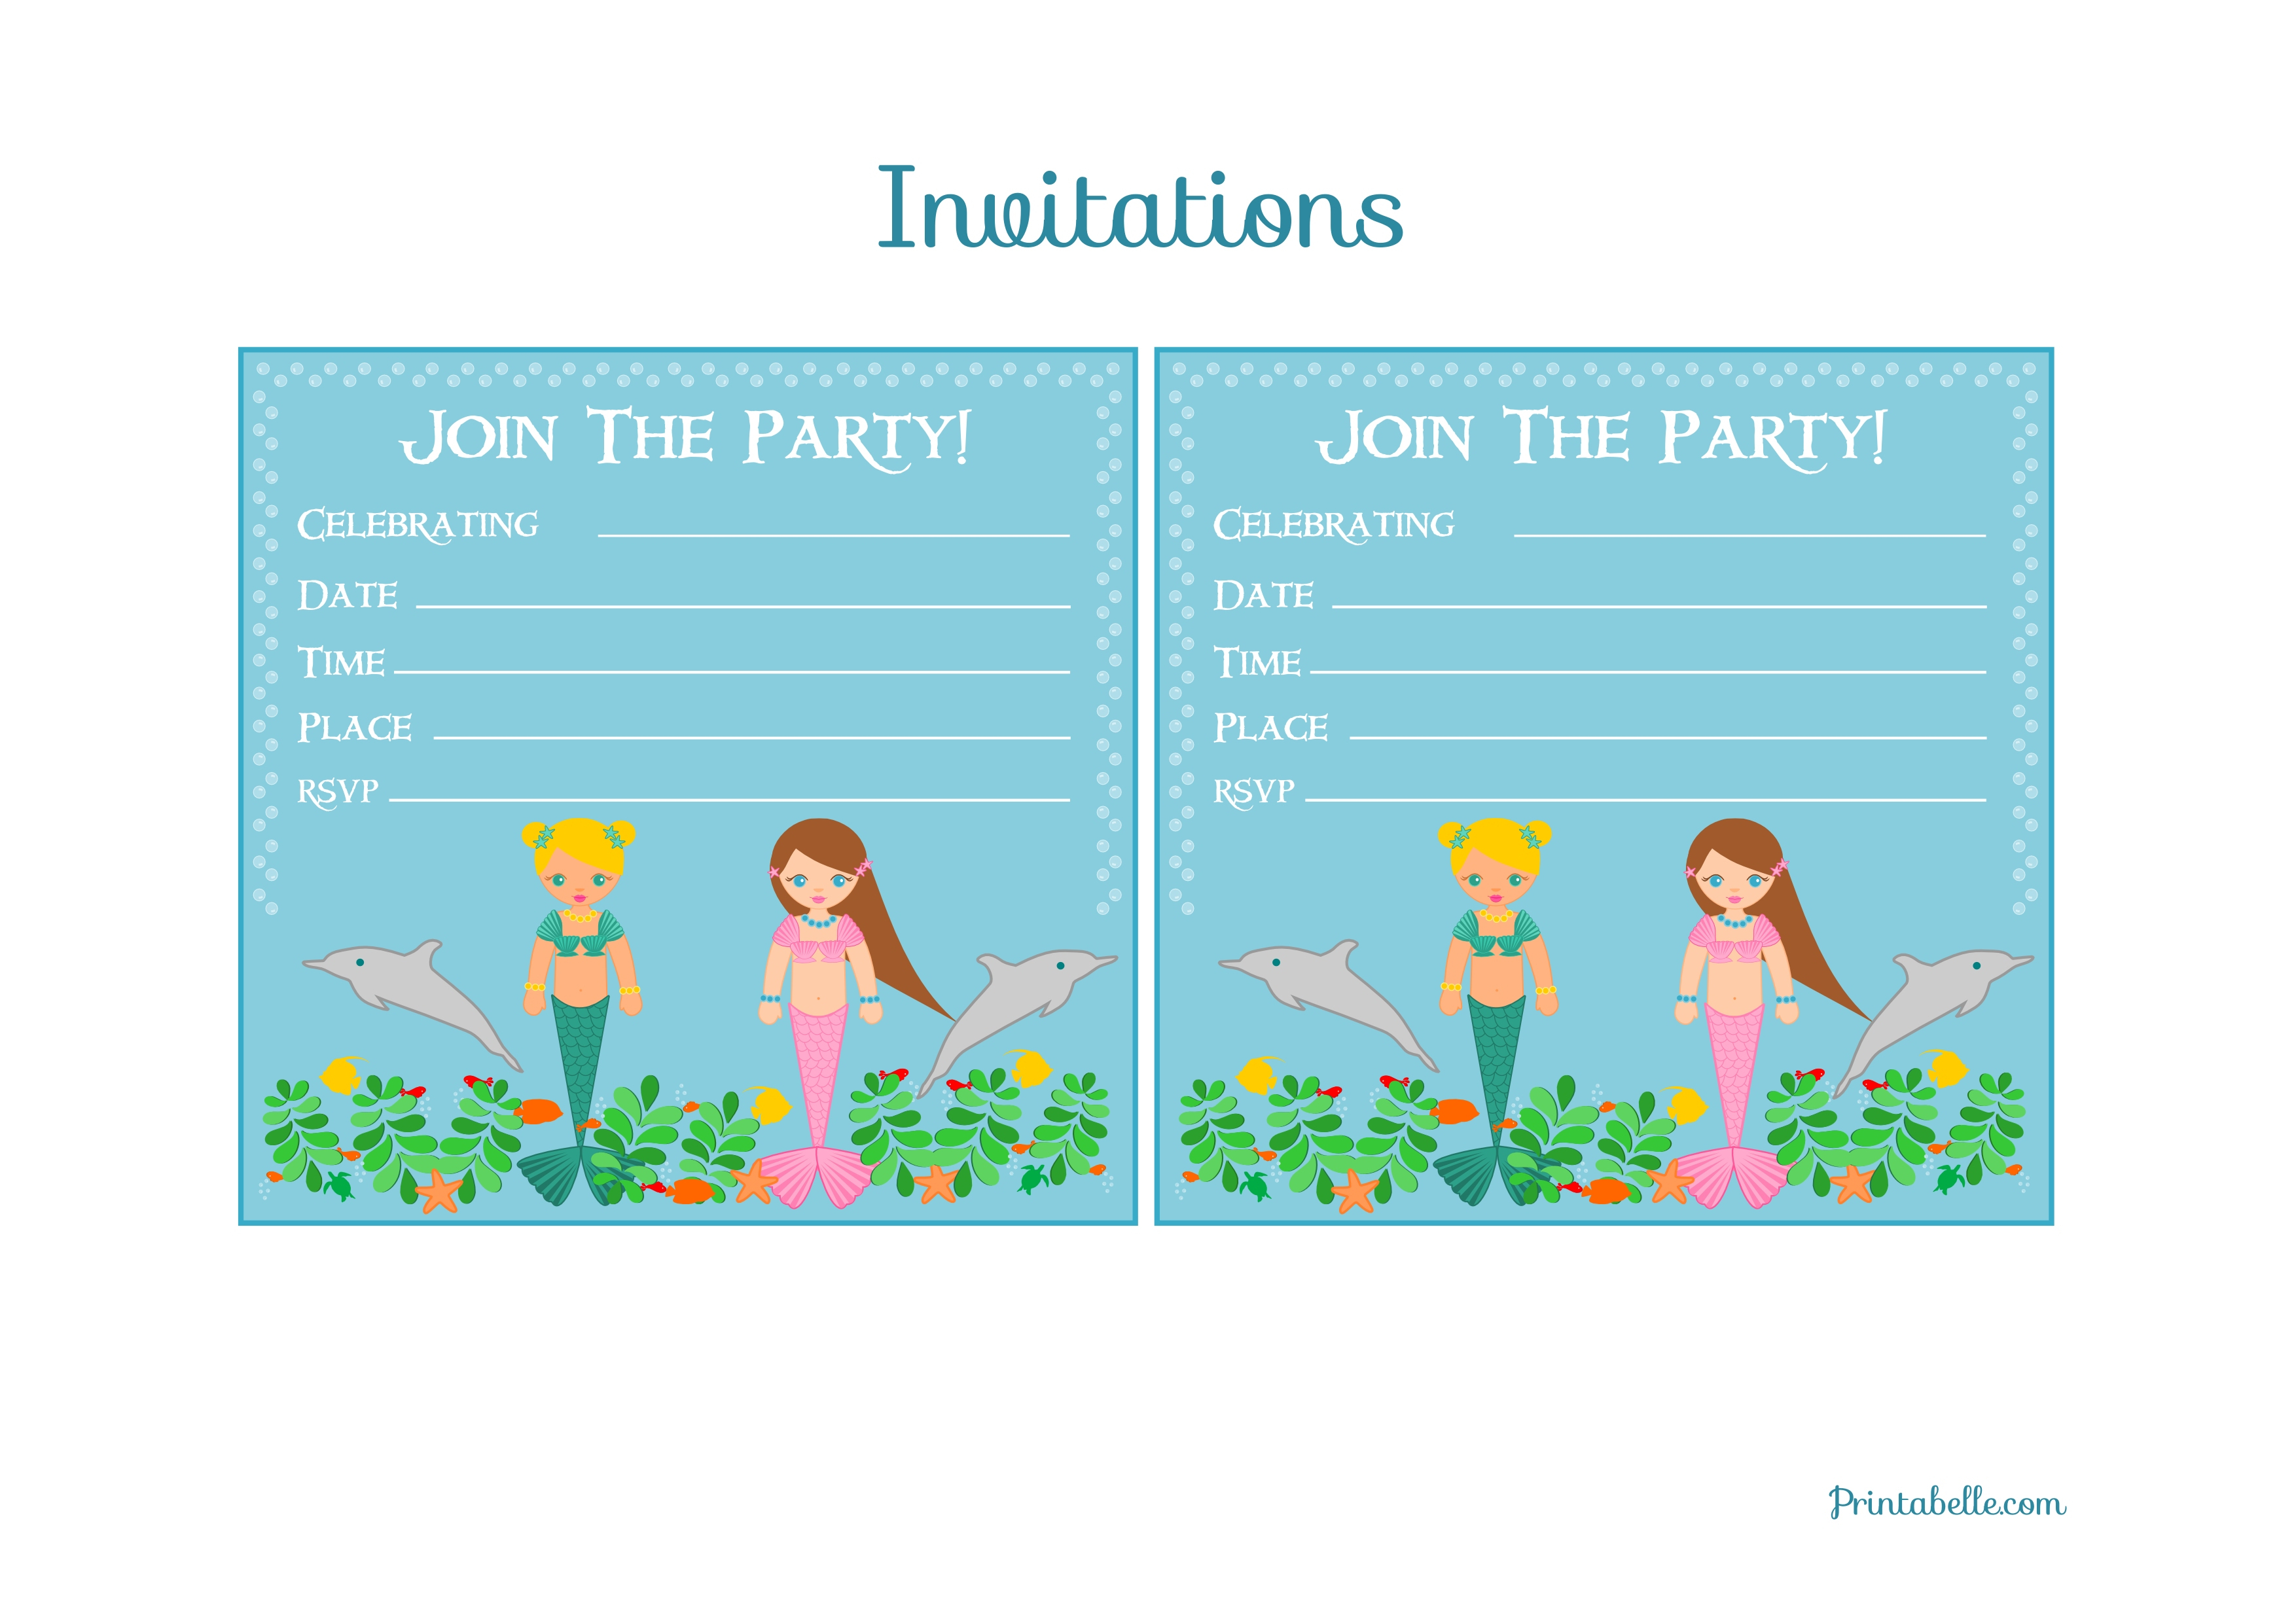 Free Mermaid Birthday Party Printables From Printabelle | Catch My Party - Mermaid Party Invitations Printable Free